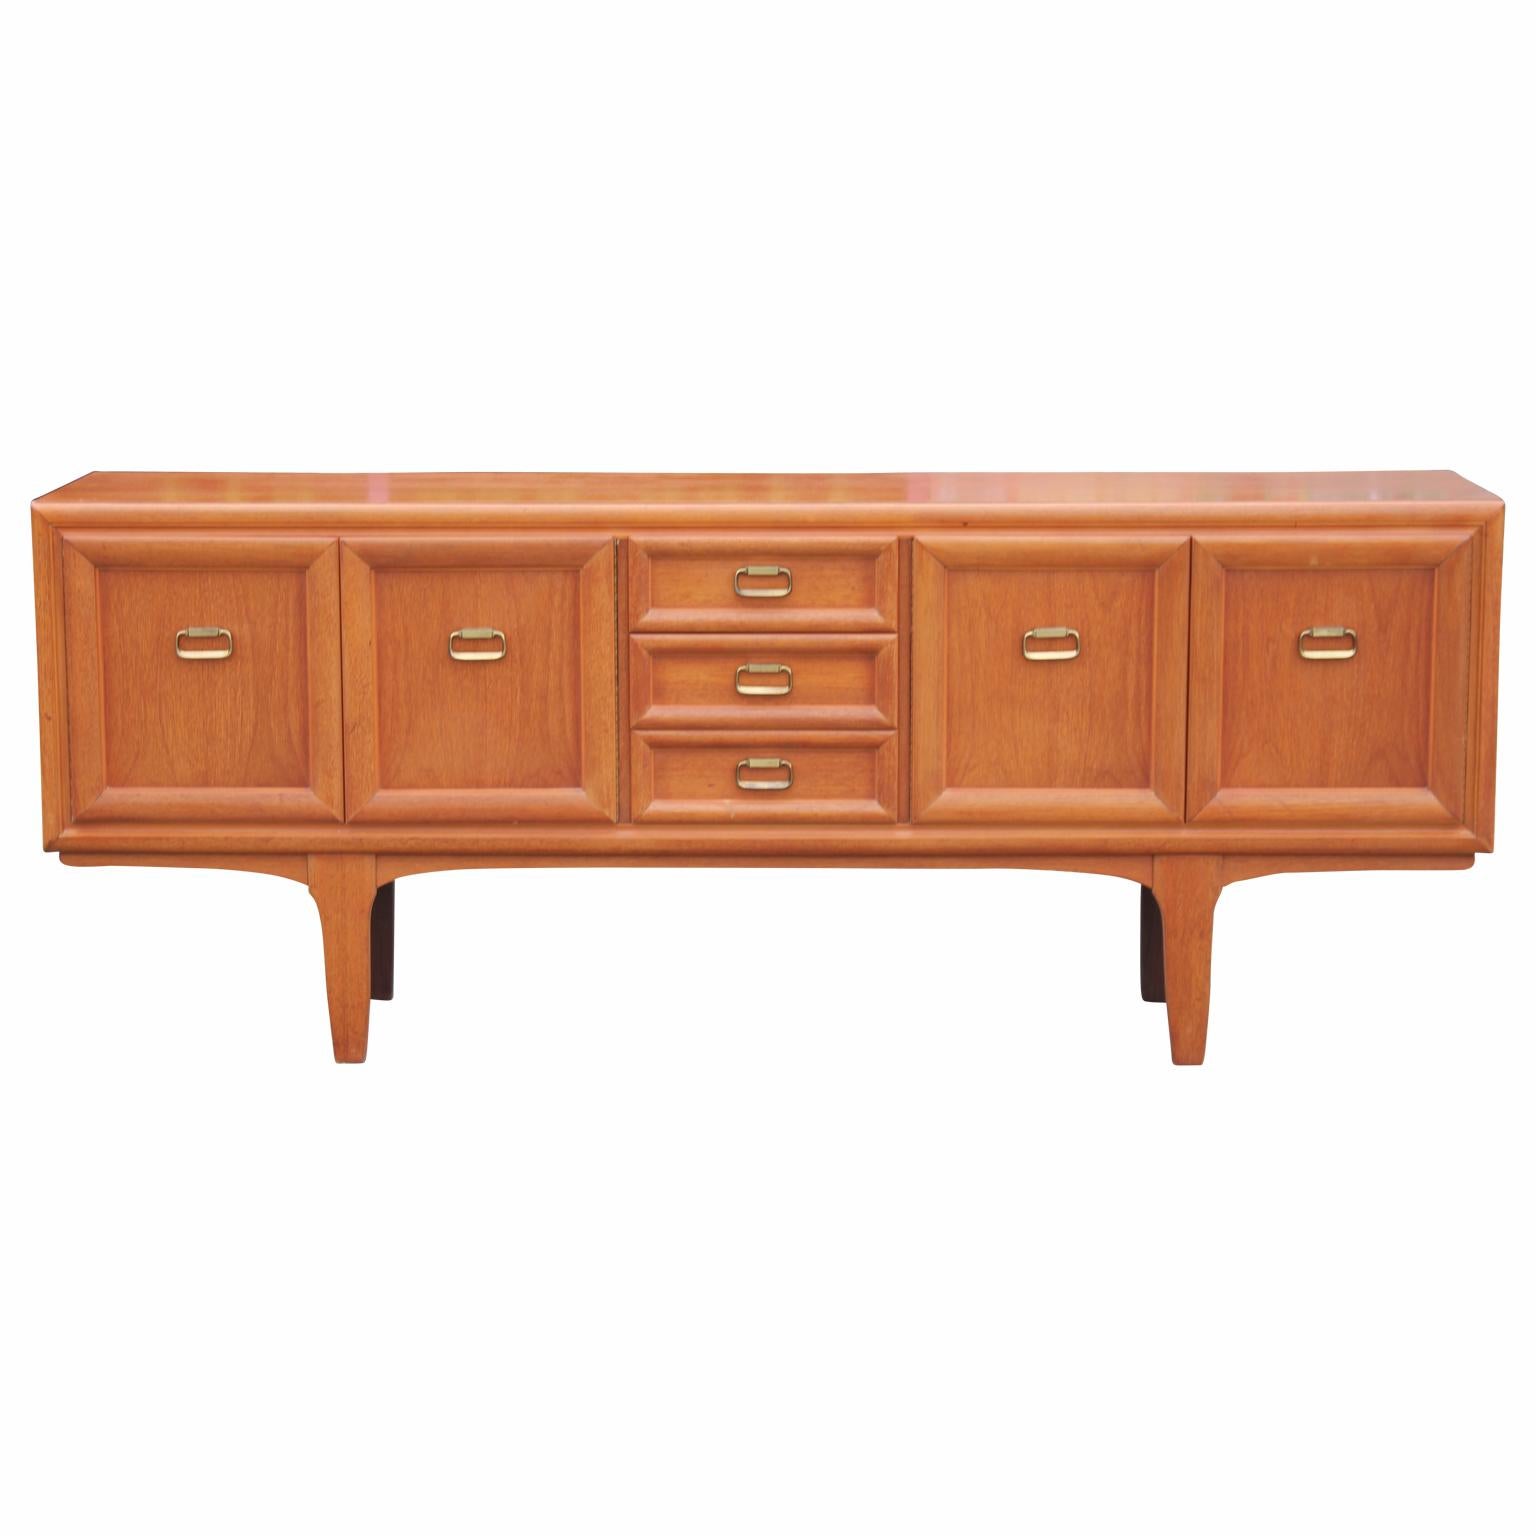 Modern Danish Style Teak Sideboard or Credenza with Brass Ring Handles